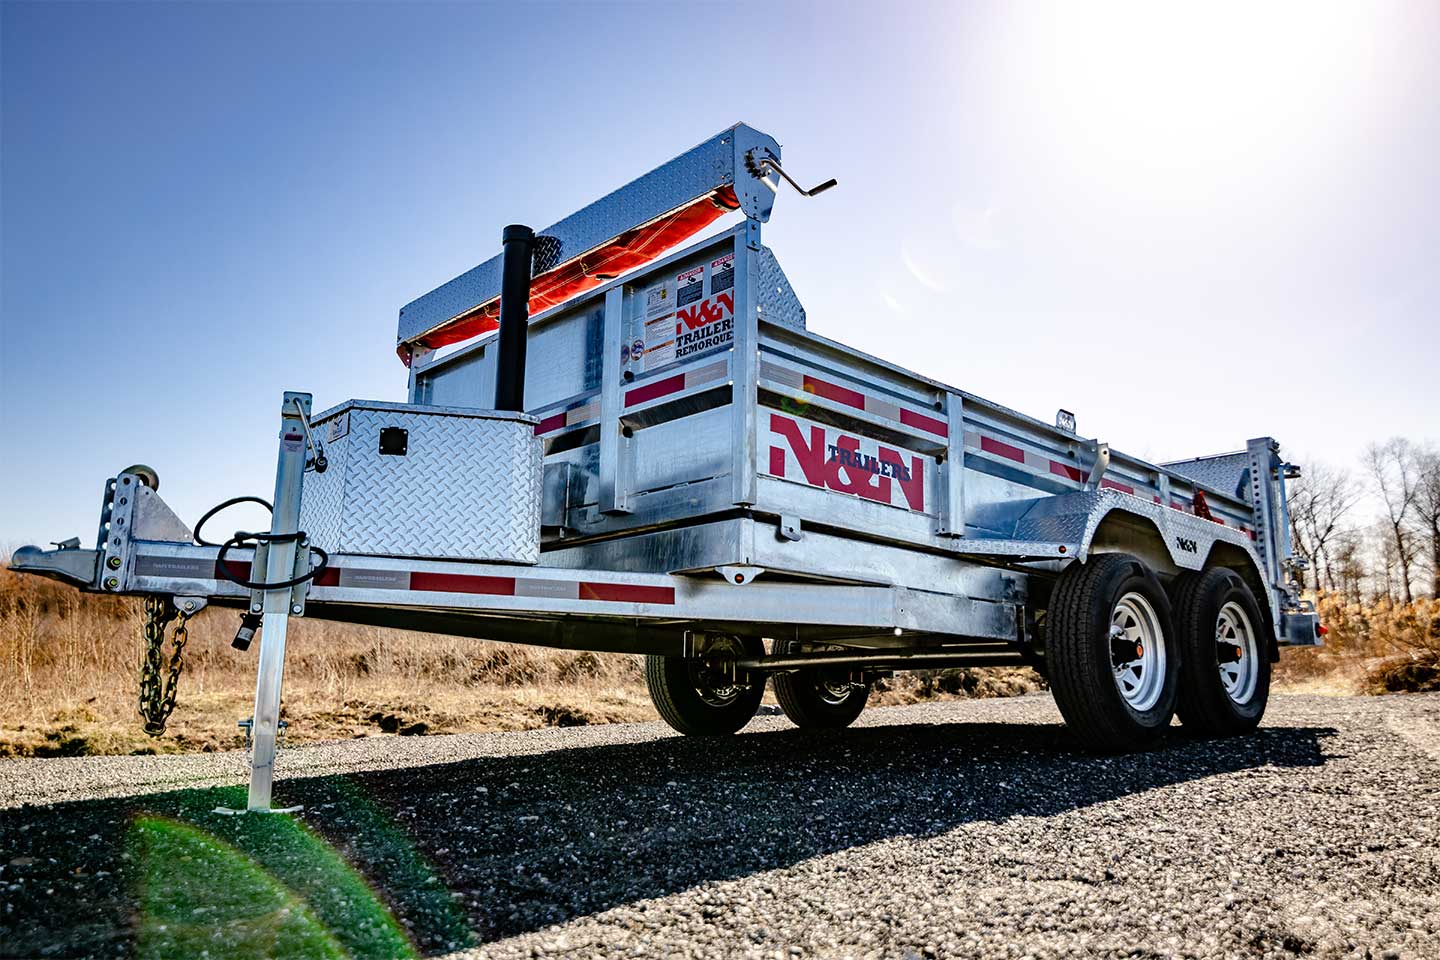 The tough dump trailer that's easy to handle   N&N Trailers